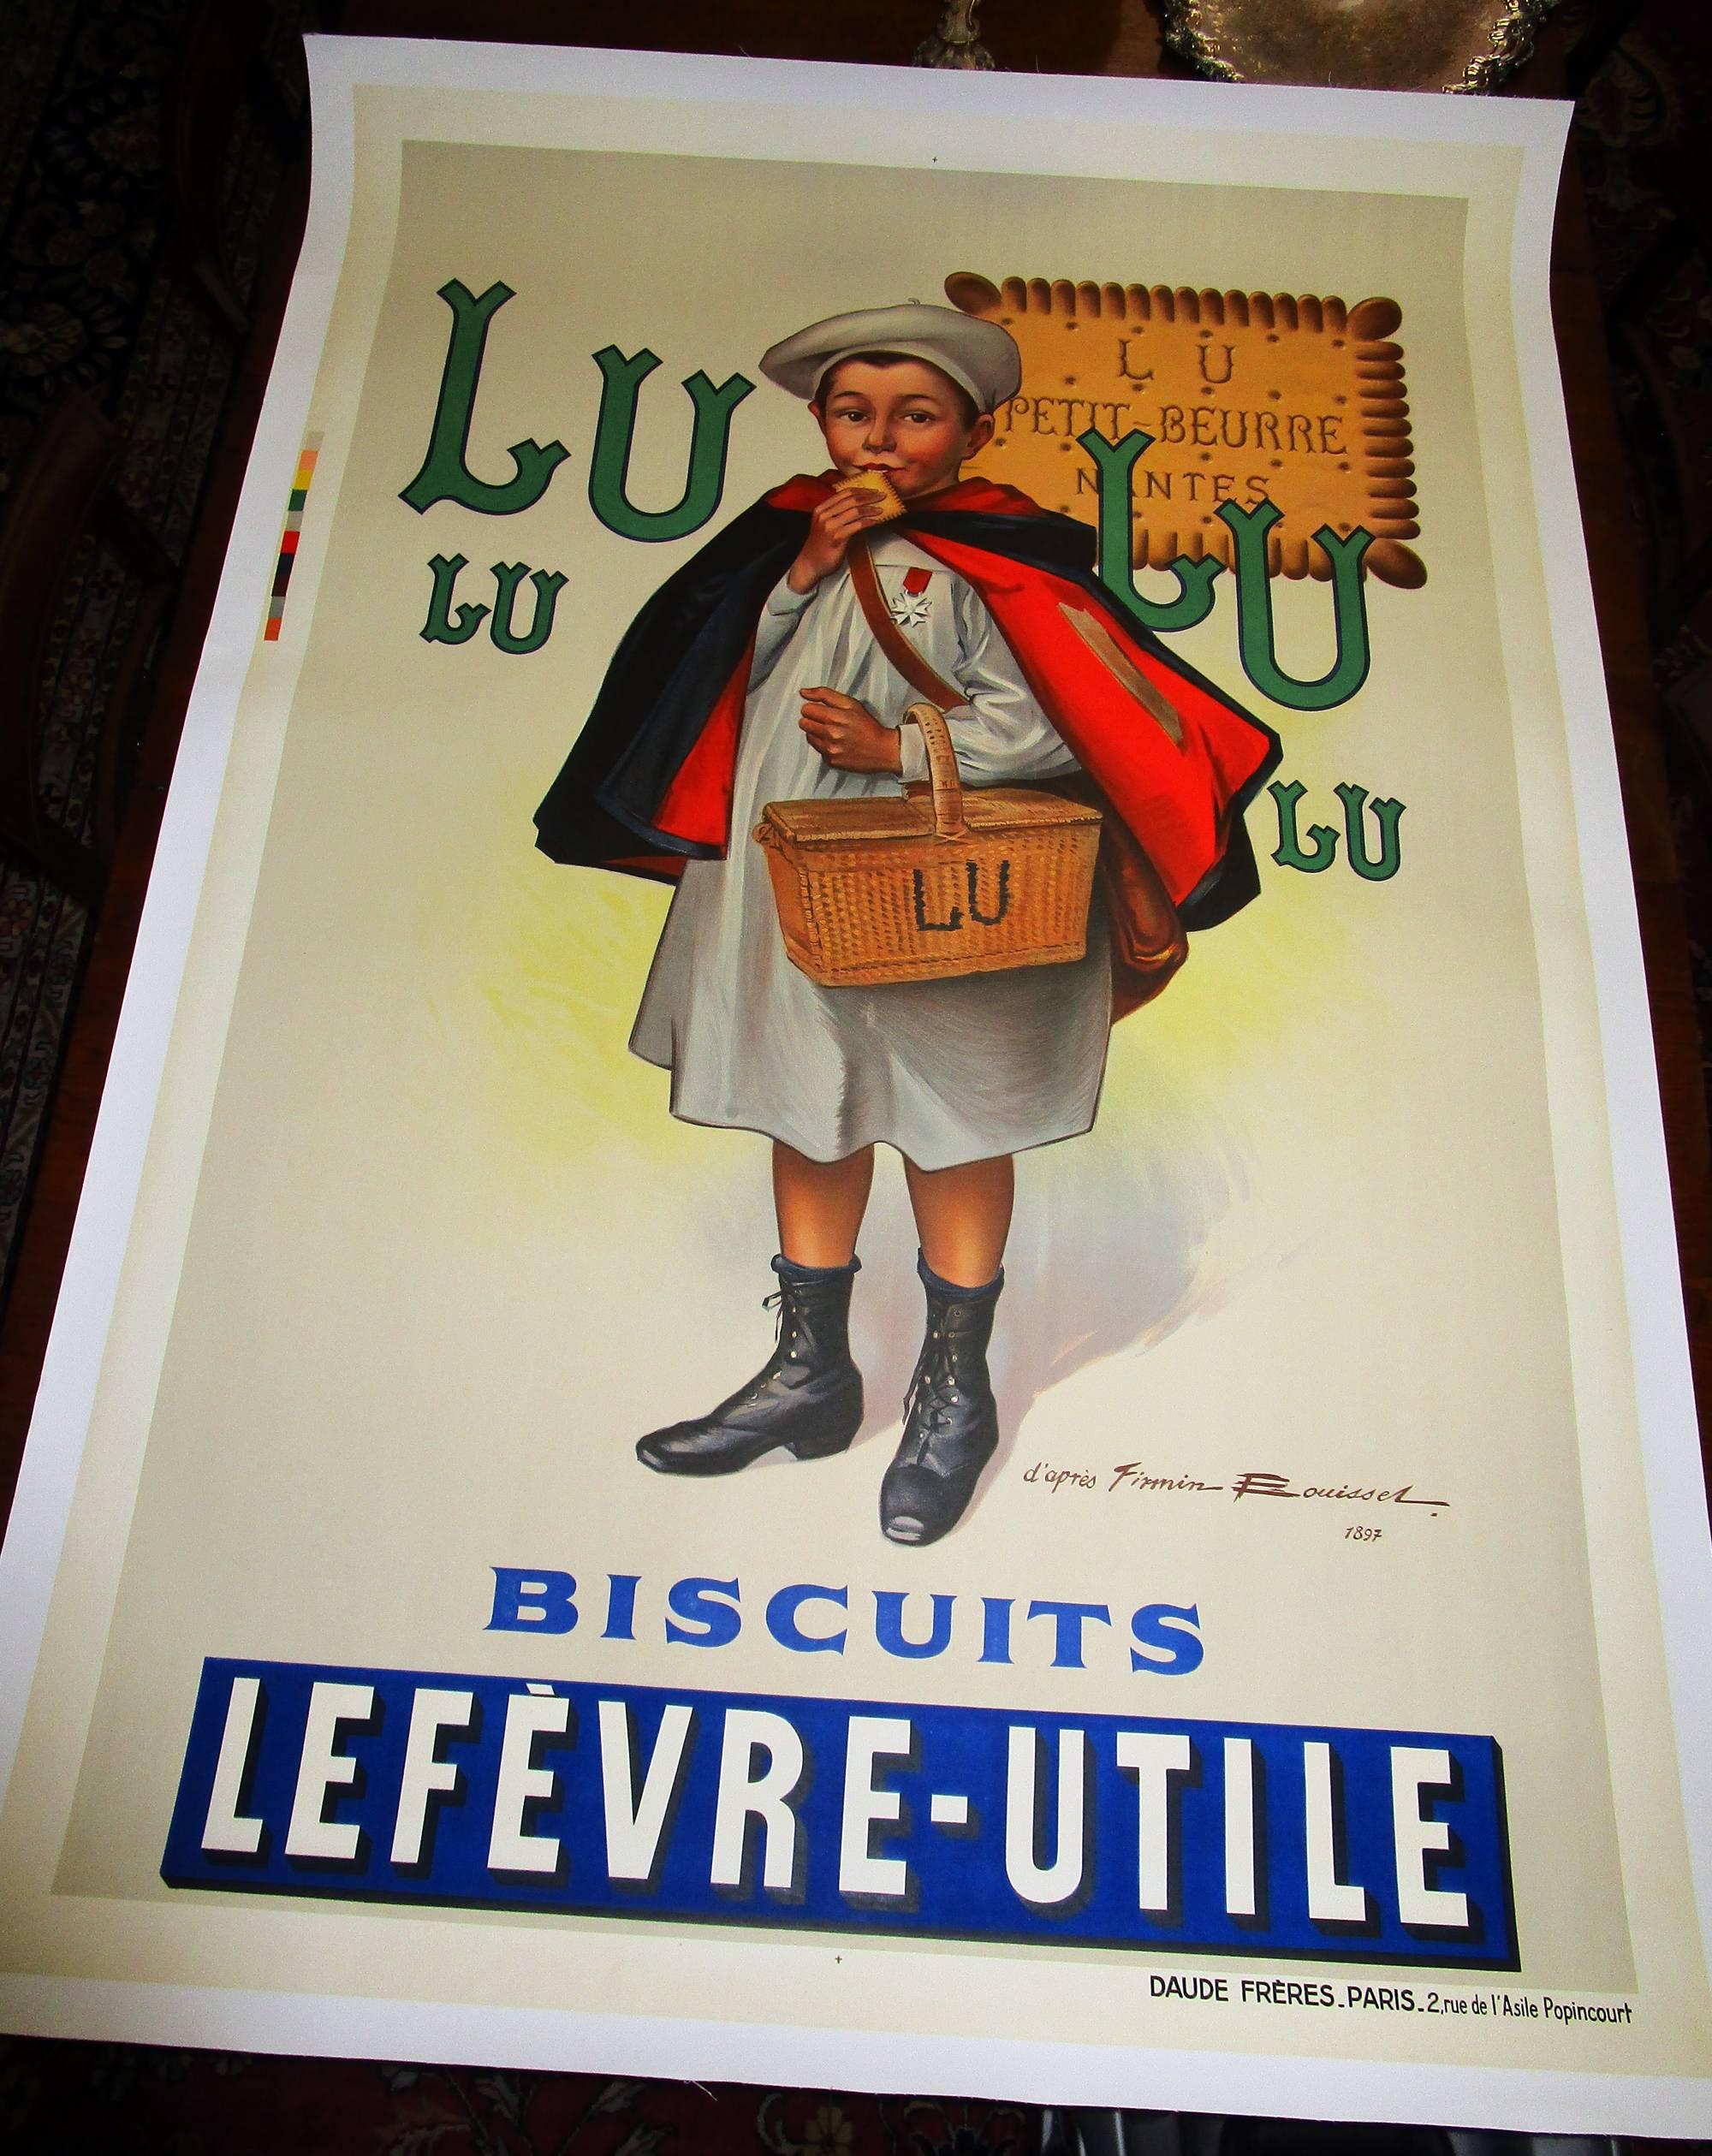 Large unframed linen backed French poster. The Lu Biscuit by Firmin Bouisset depicting a young schoolboy with an academic medal on his chest, continuing his reward by enjoying a delicious Lu Biscuit treat. This nostalgic poster resonated with